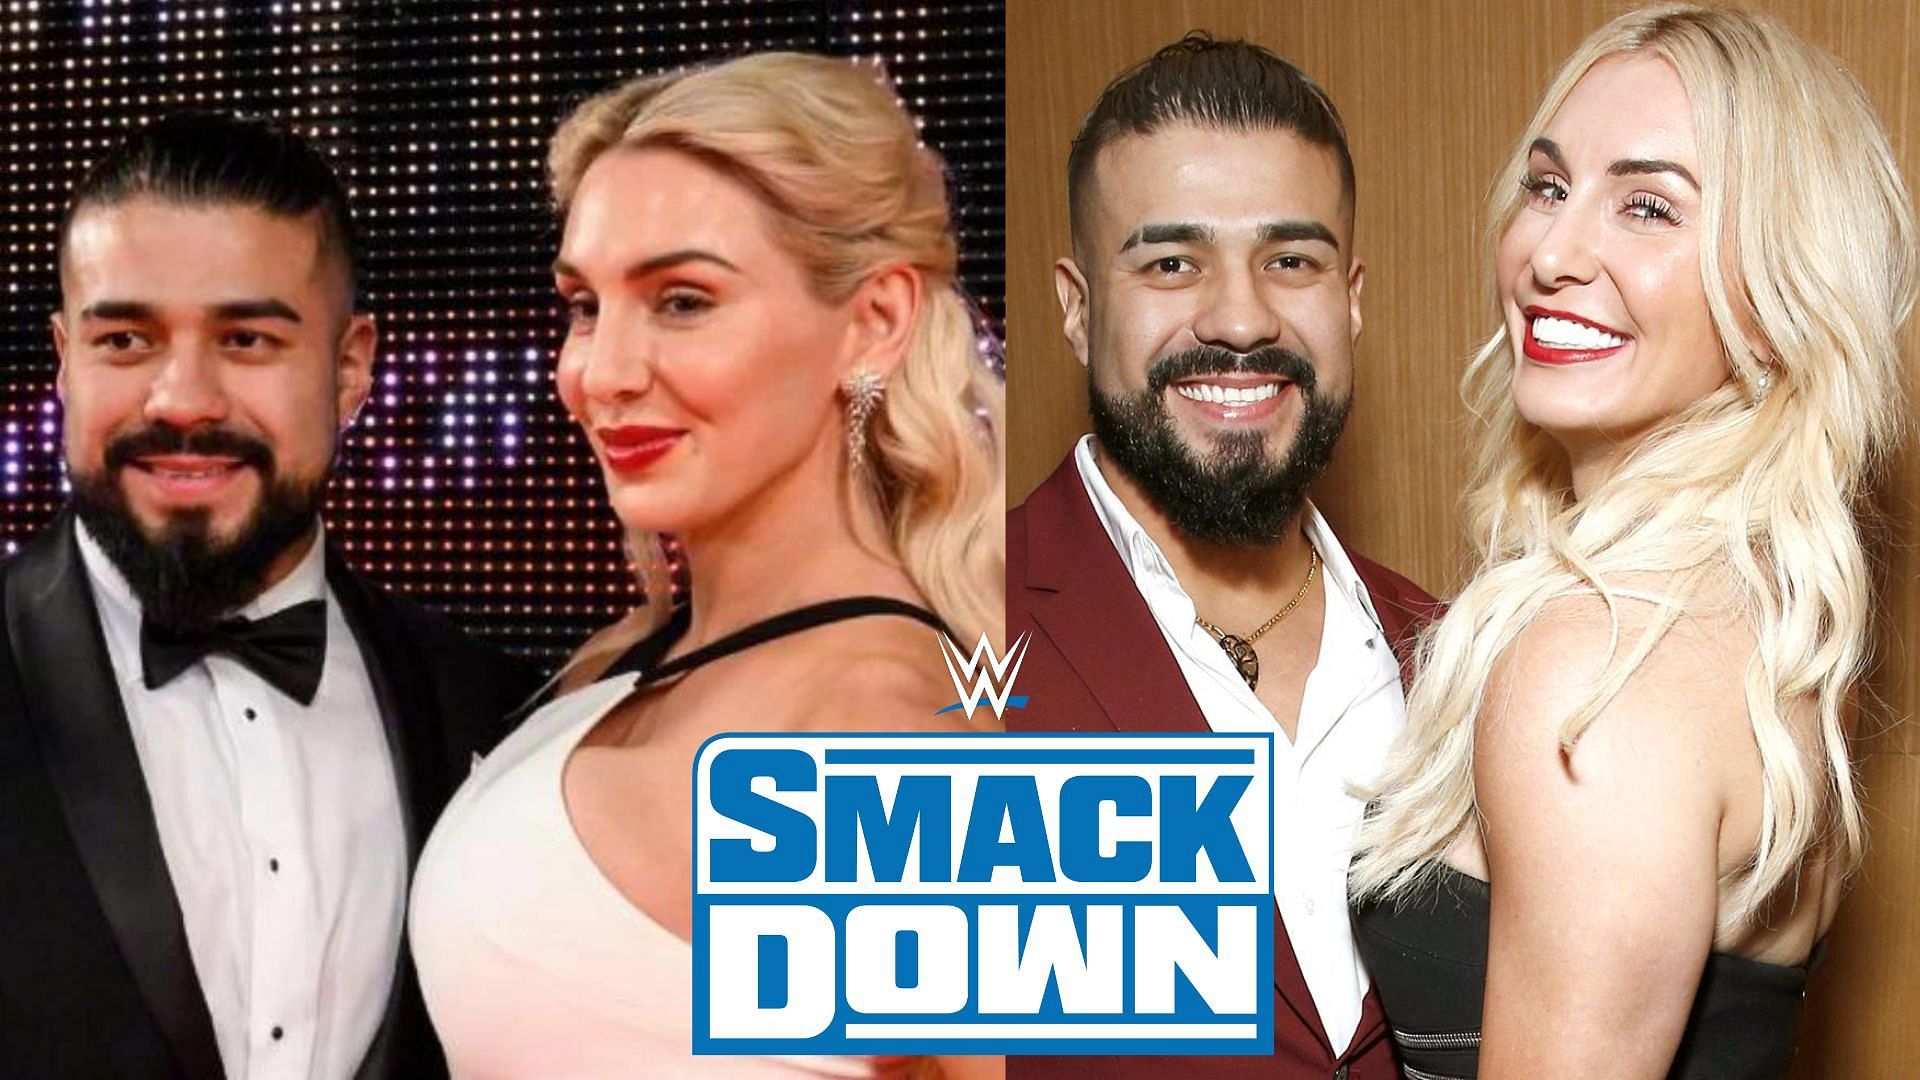 Charlotte Flair referenced her husband Andrade El Idolo on WWE SmackDown